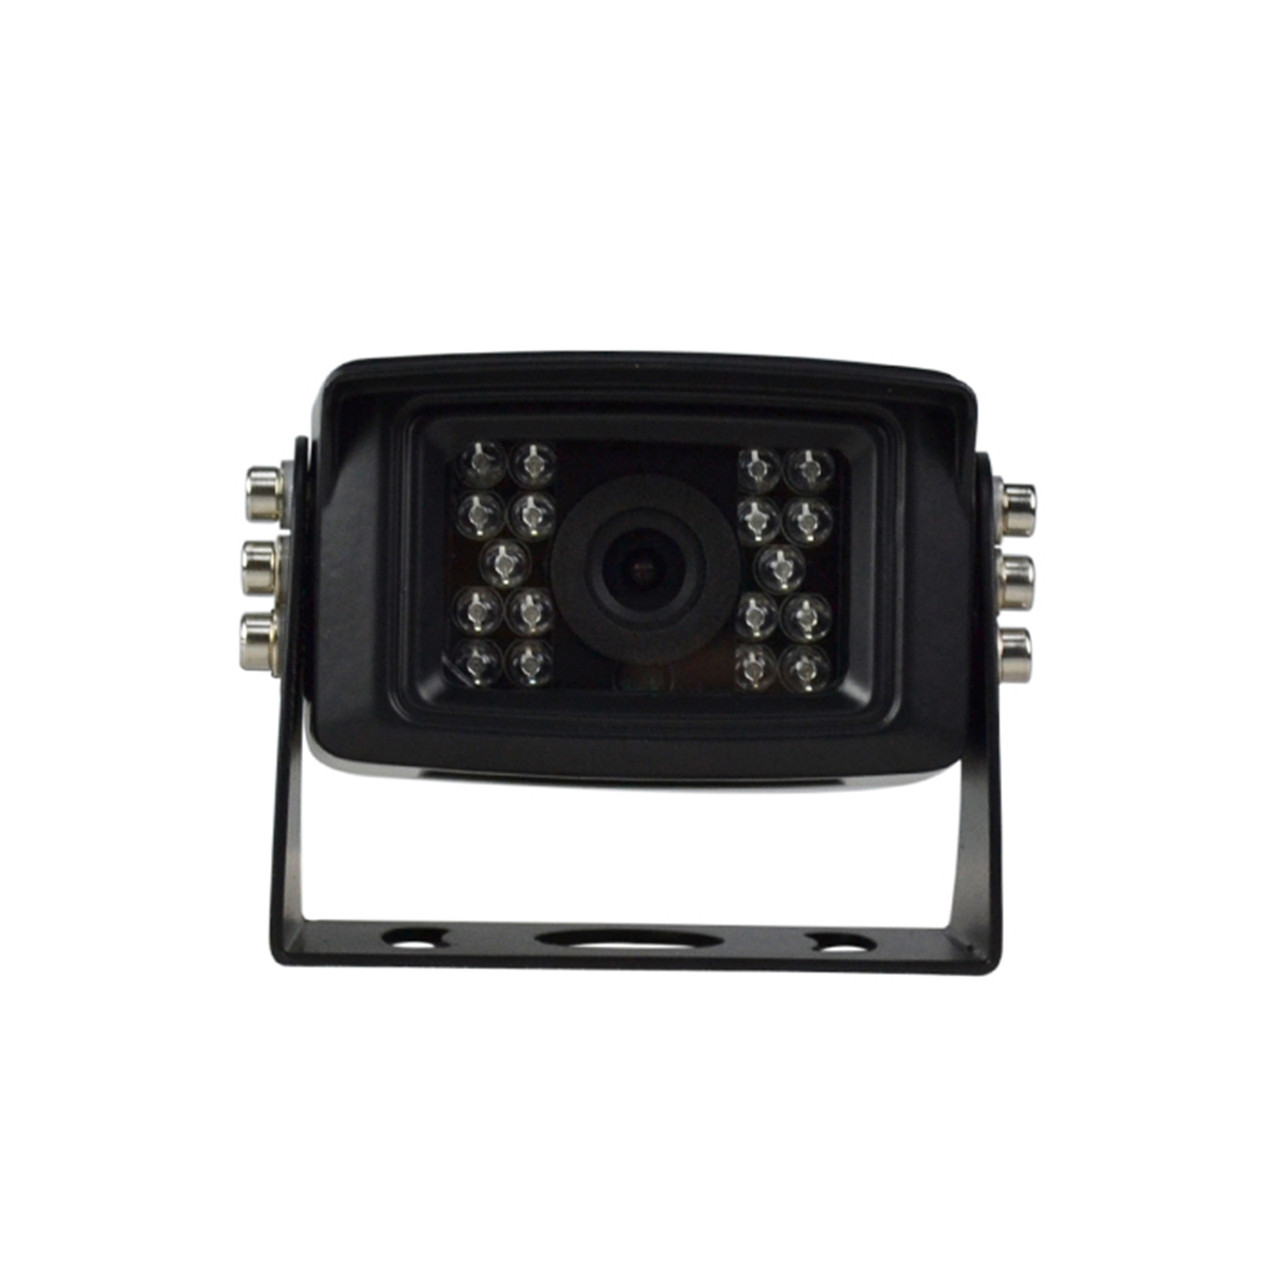 Waterproof 18 LED IR Rear View Reverse Backup Camera Night View For Bus Truck RV